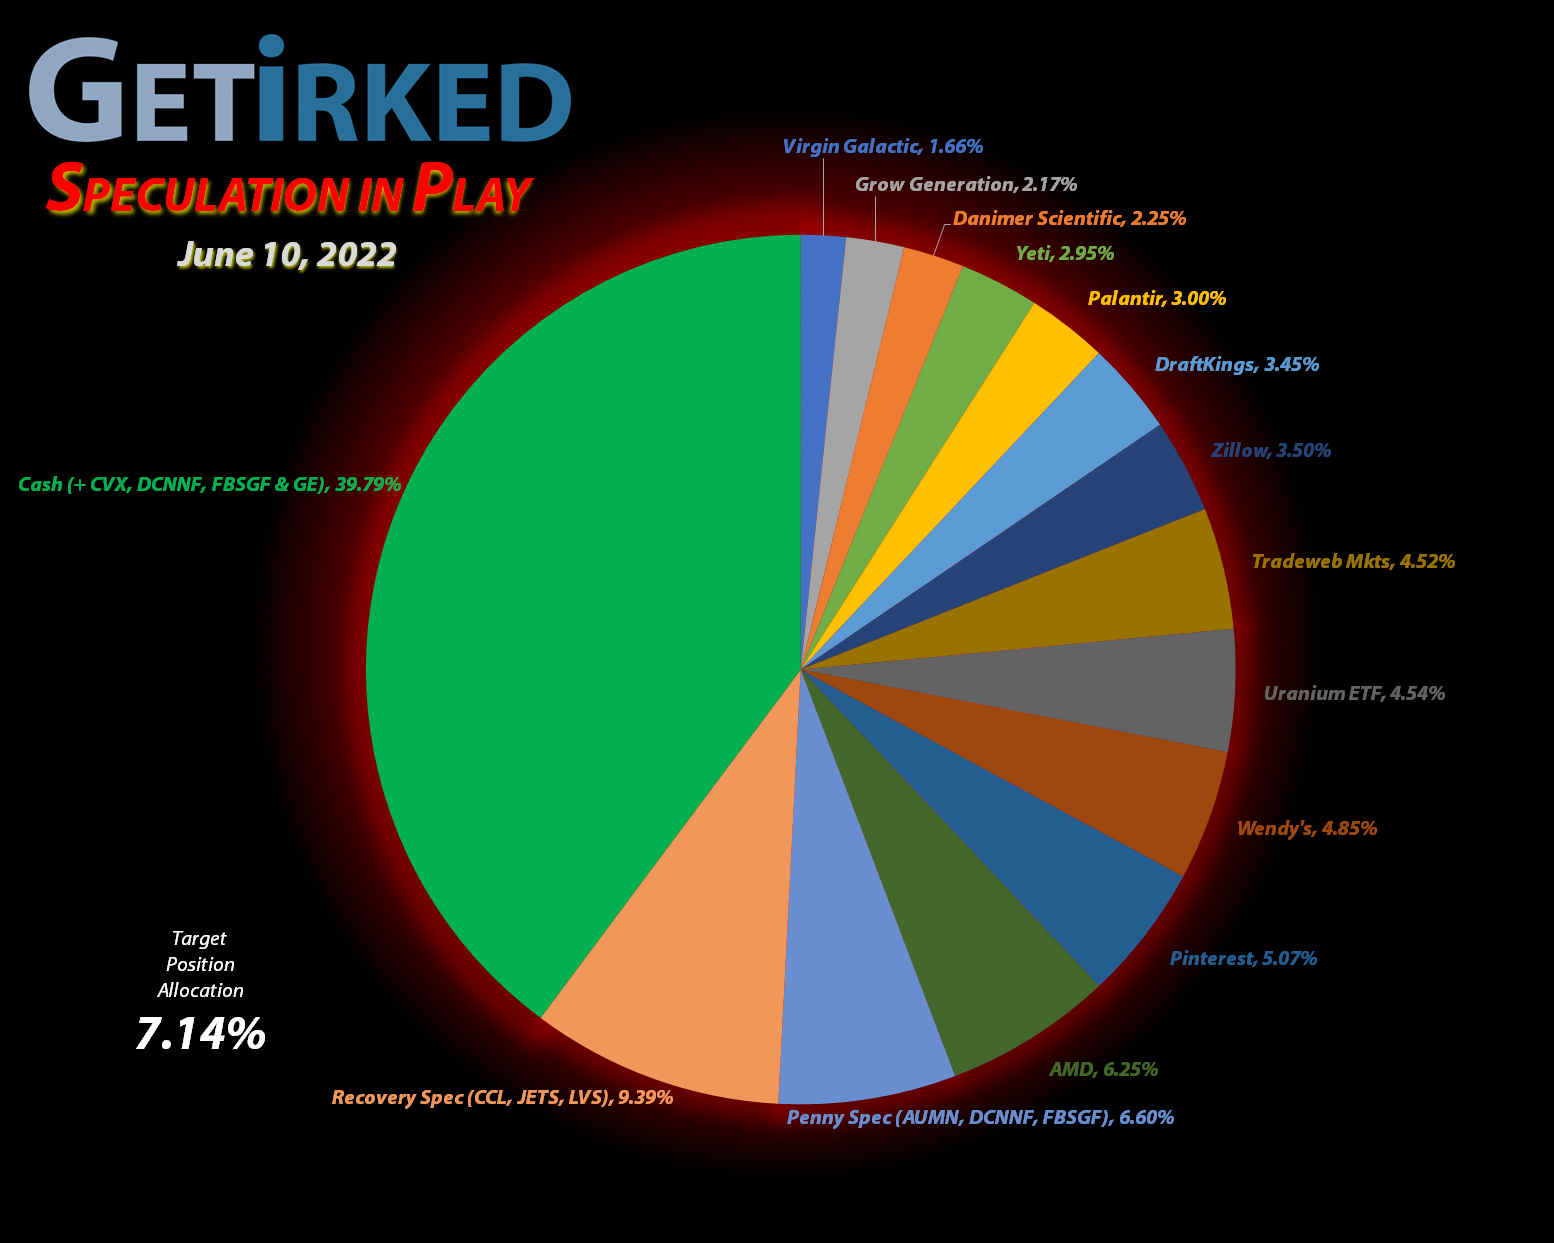 Get Irked - Speculation in Play - Current Holdings - June 10, 2022